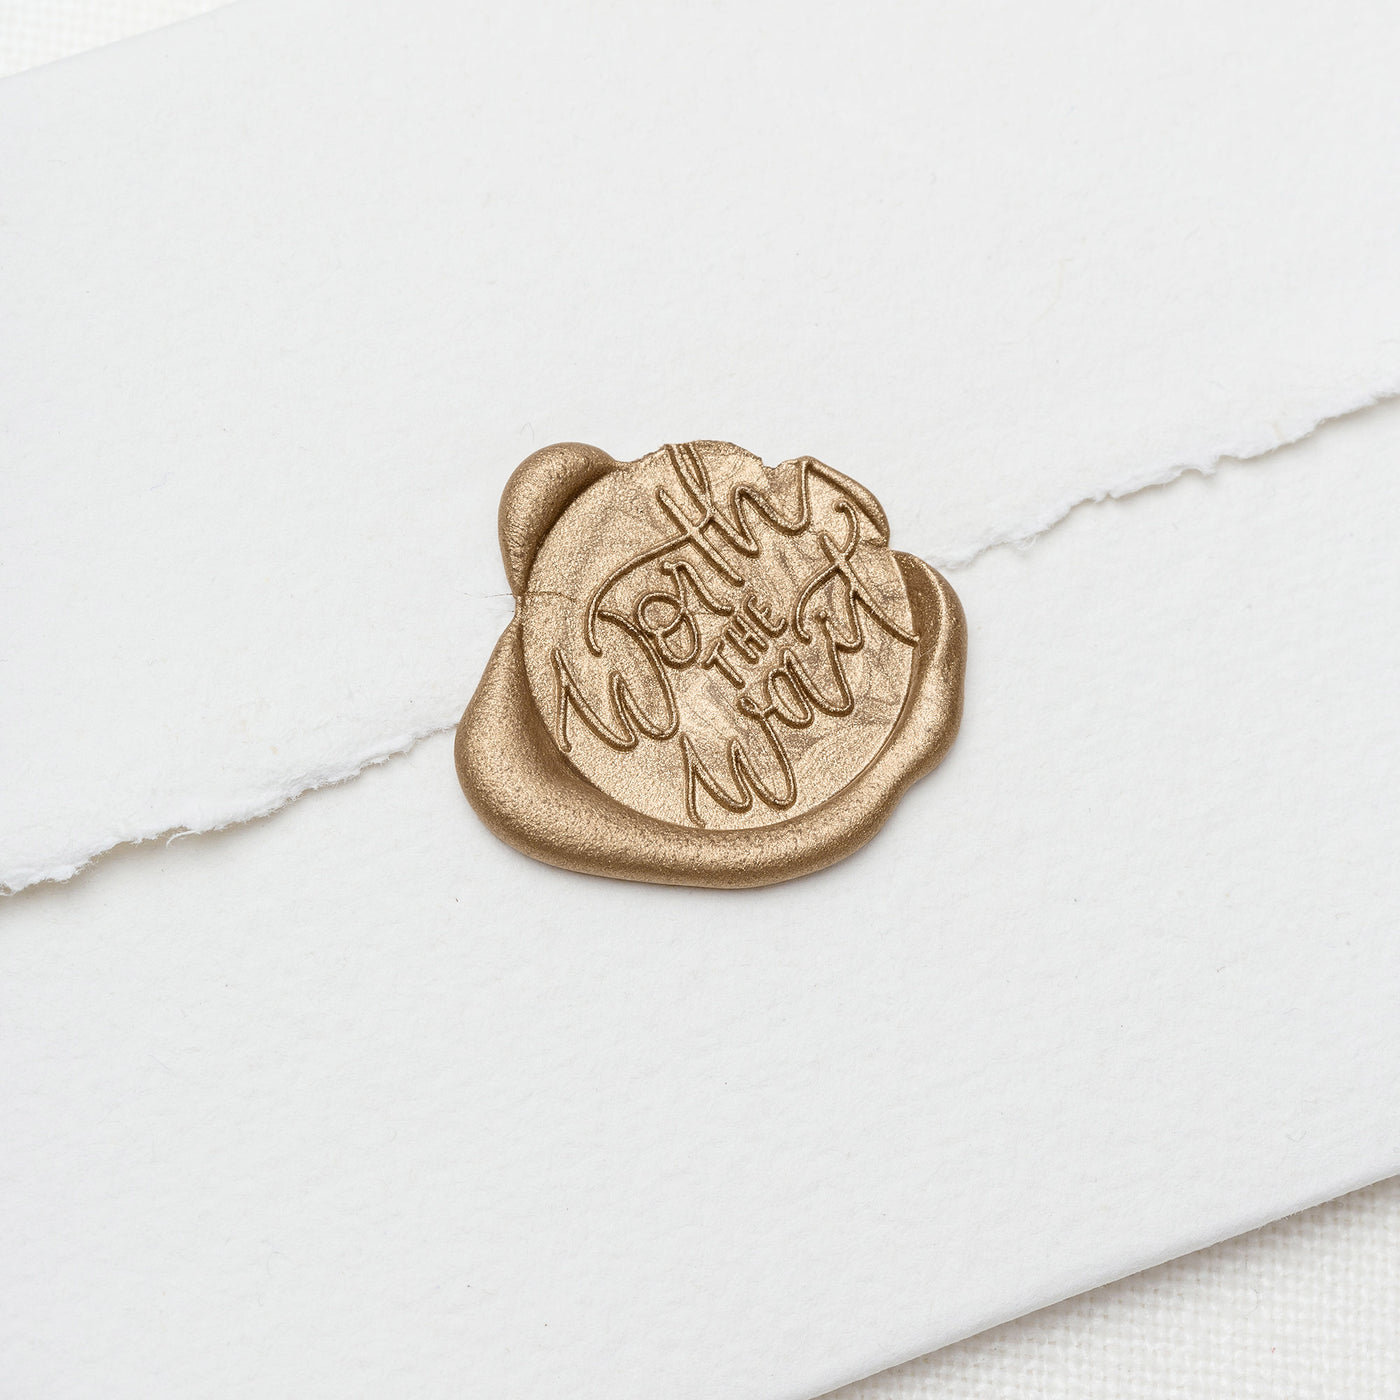 CALLIGRAPHY SCRIPT WAX SEAL STAMP - WORTH THE WAIT